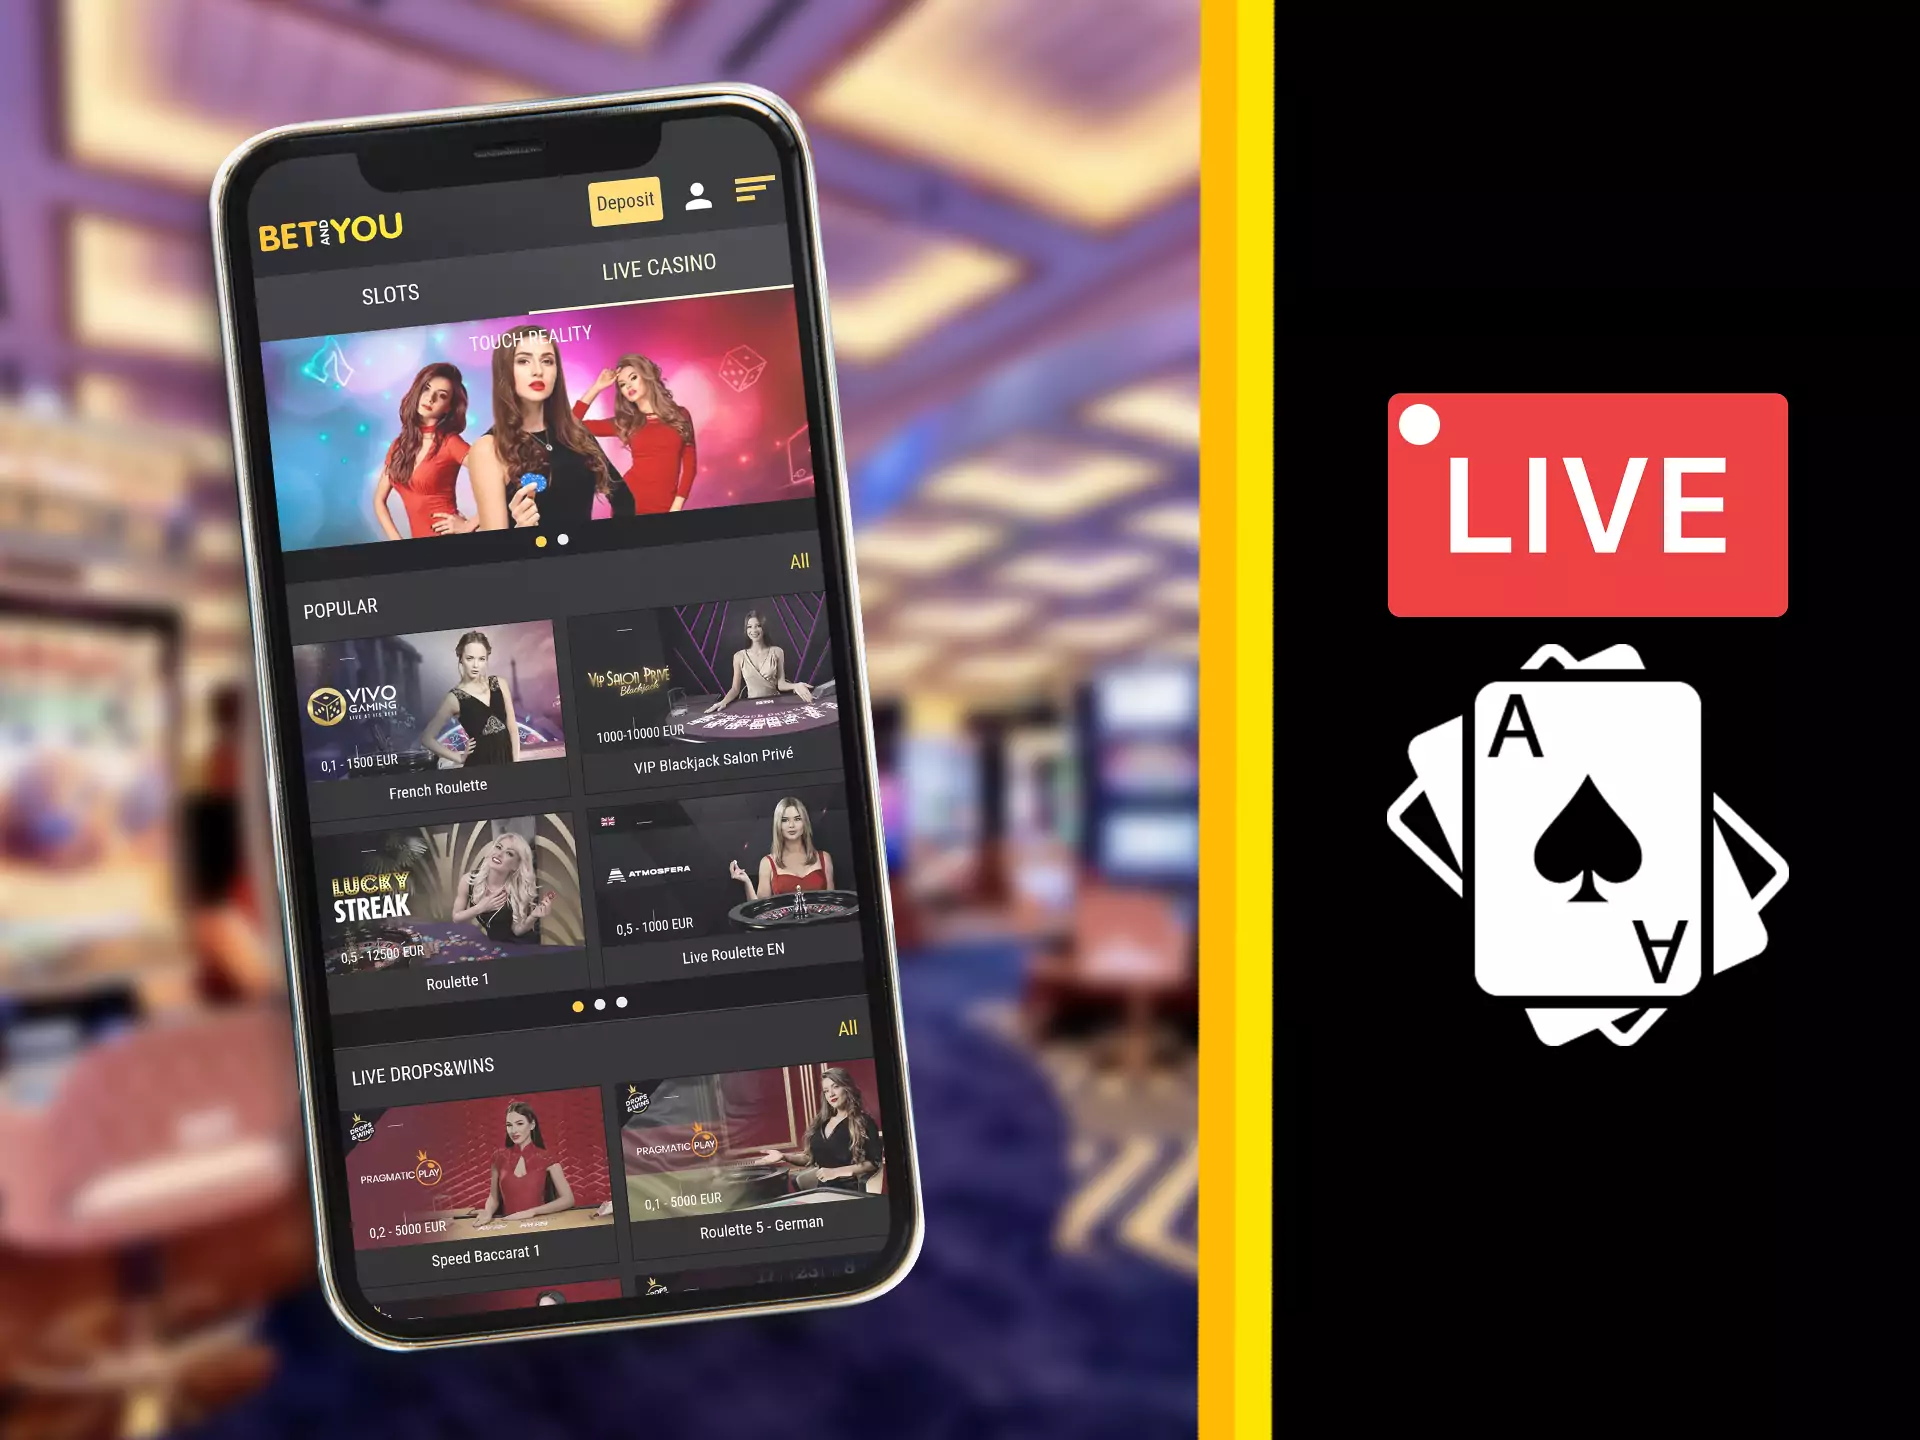 The Betandyou app supports casino games with real dealers.